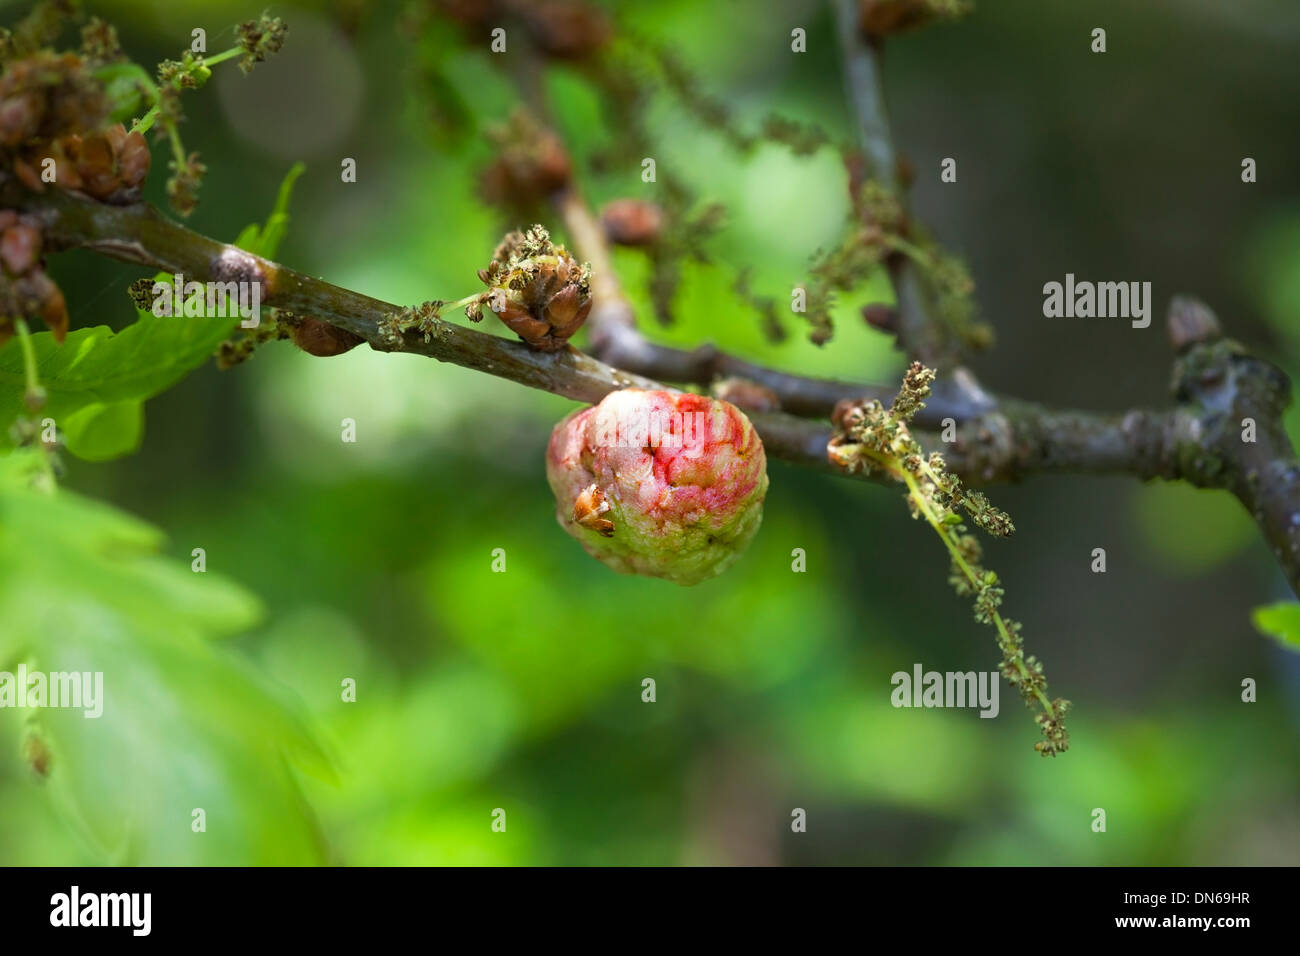 Oak Apple Gall Produced as a Reaction to Egg Laying by the Gall Wasp Biorhiza pallida UK Stock Photo